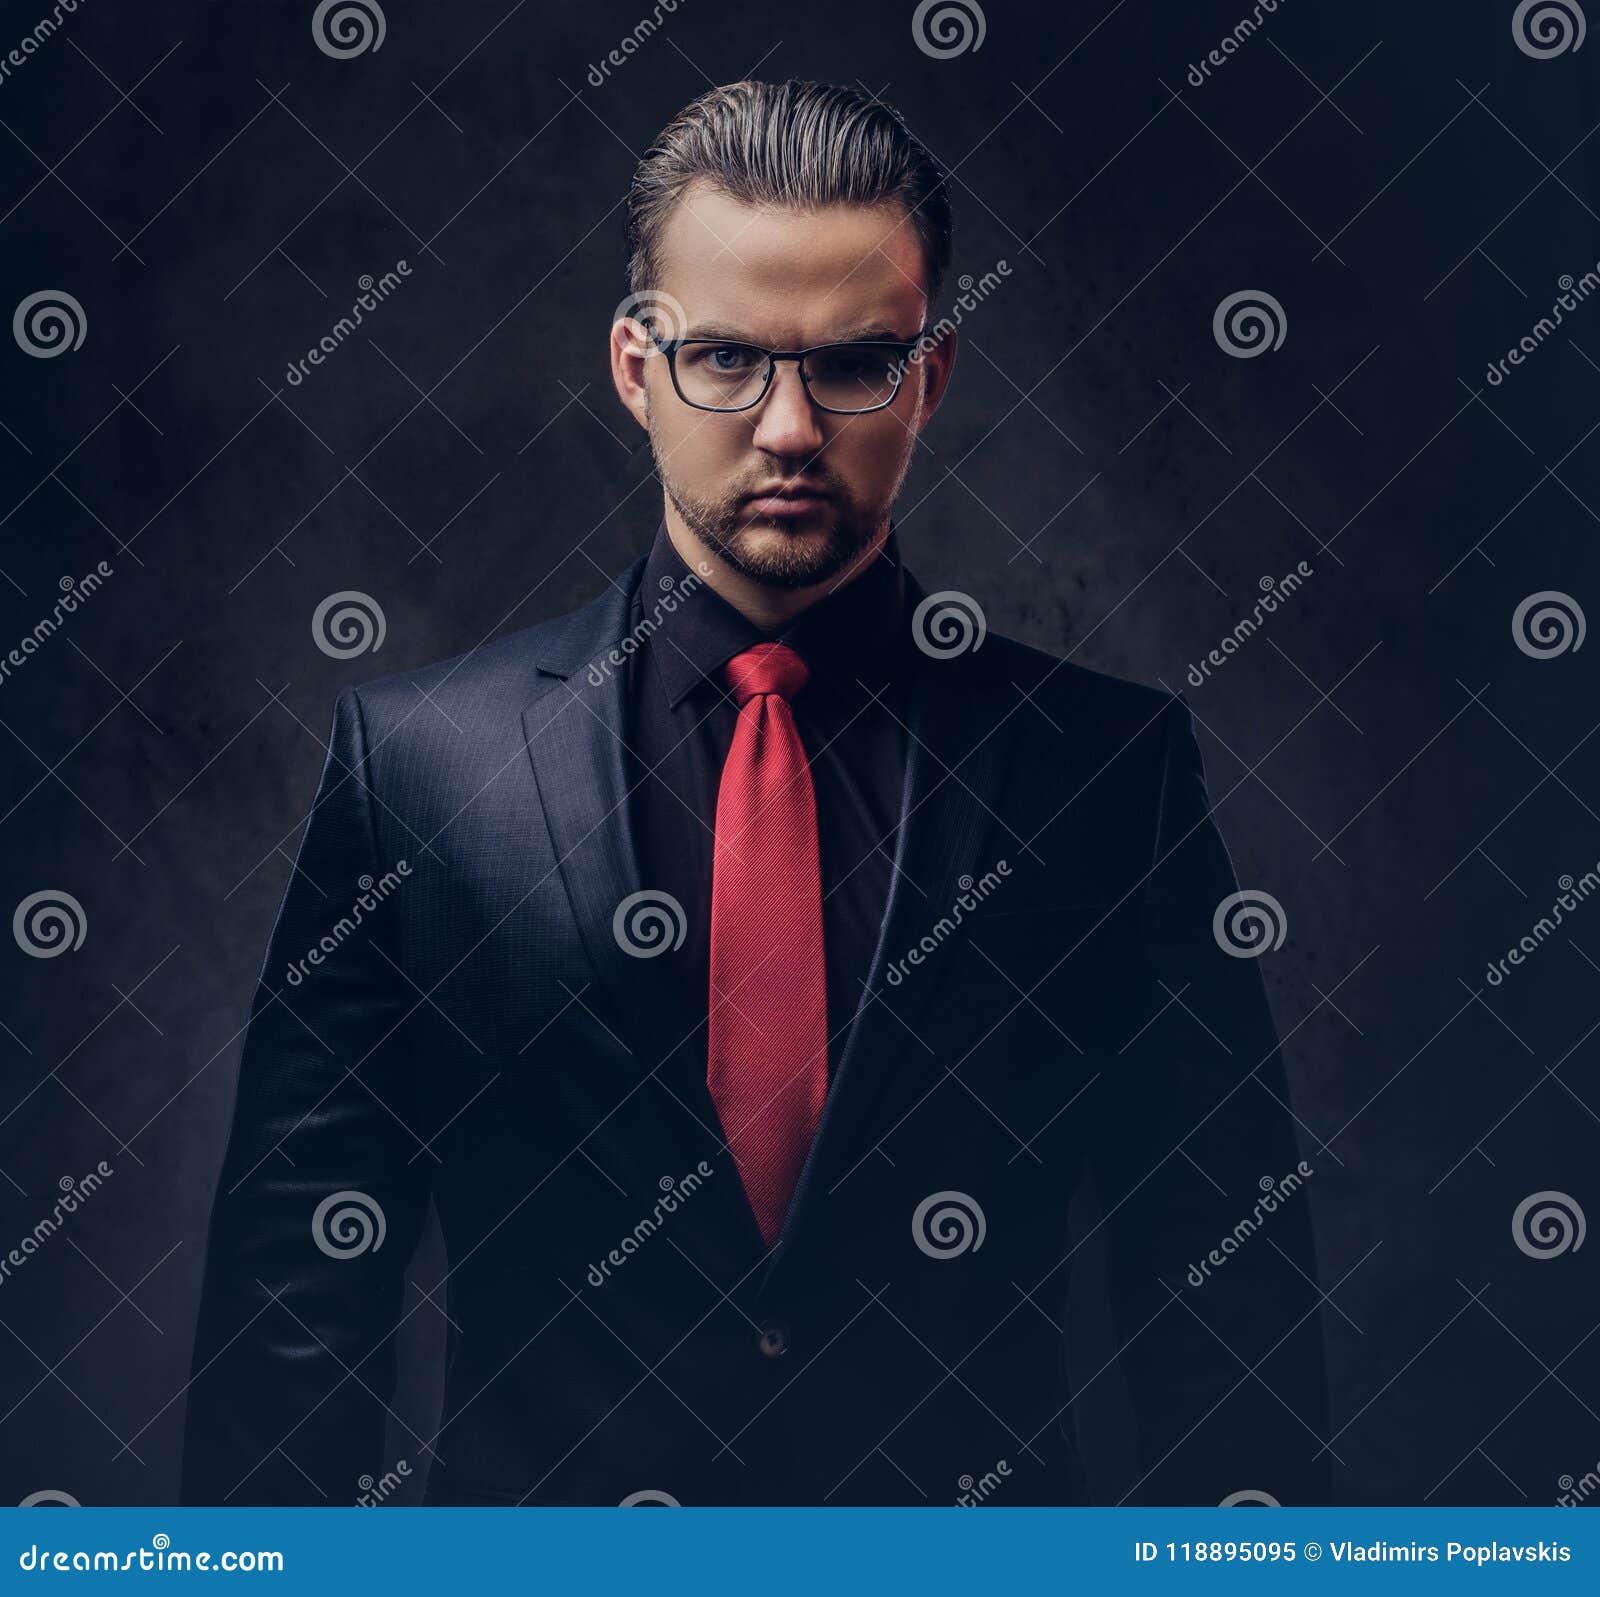 Man Suit Black White Shirt With Red Tie, Man Suit, Business Suit, Suit PNG  Transparent Clipart Image and PSD File for Free Download